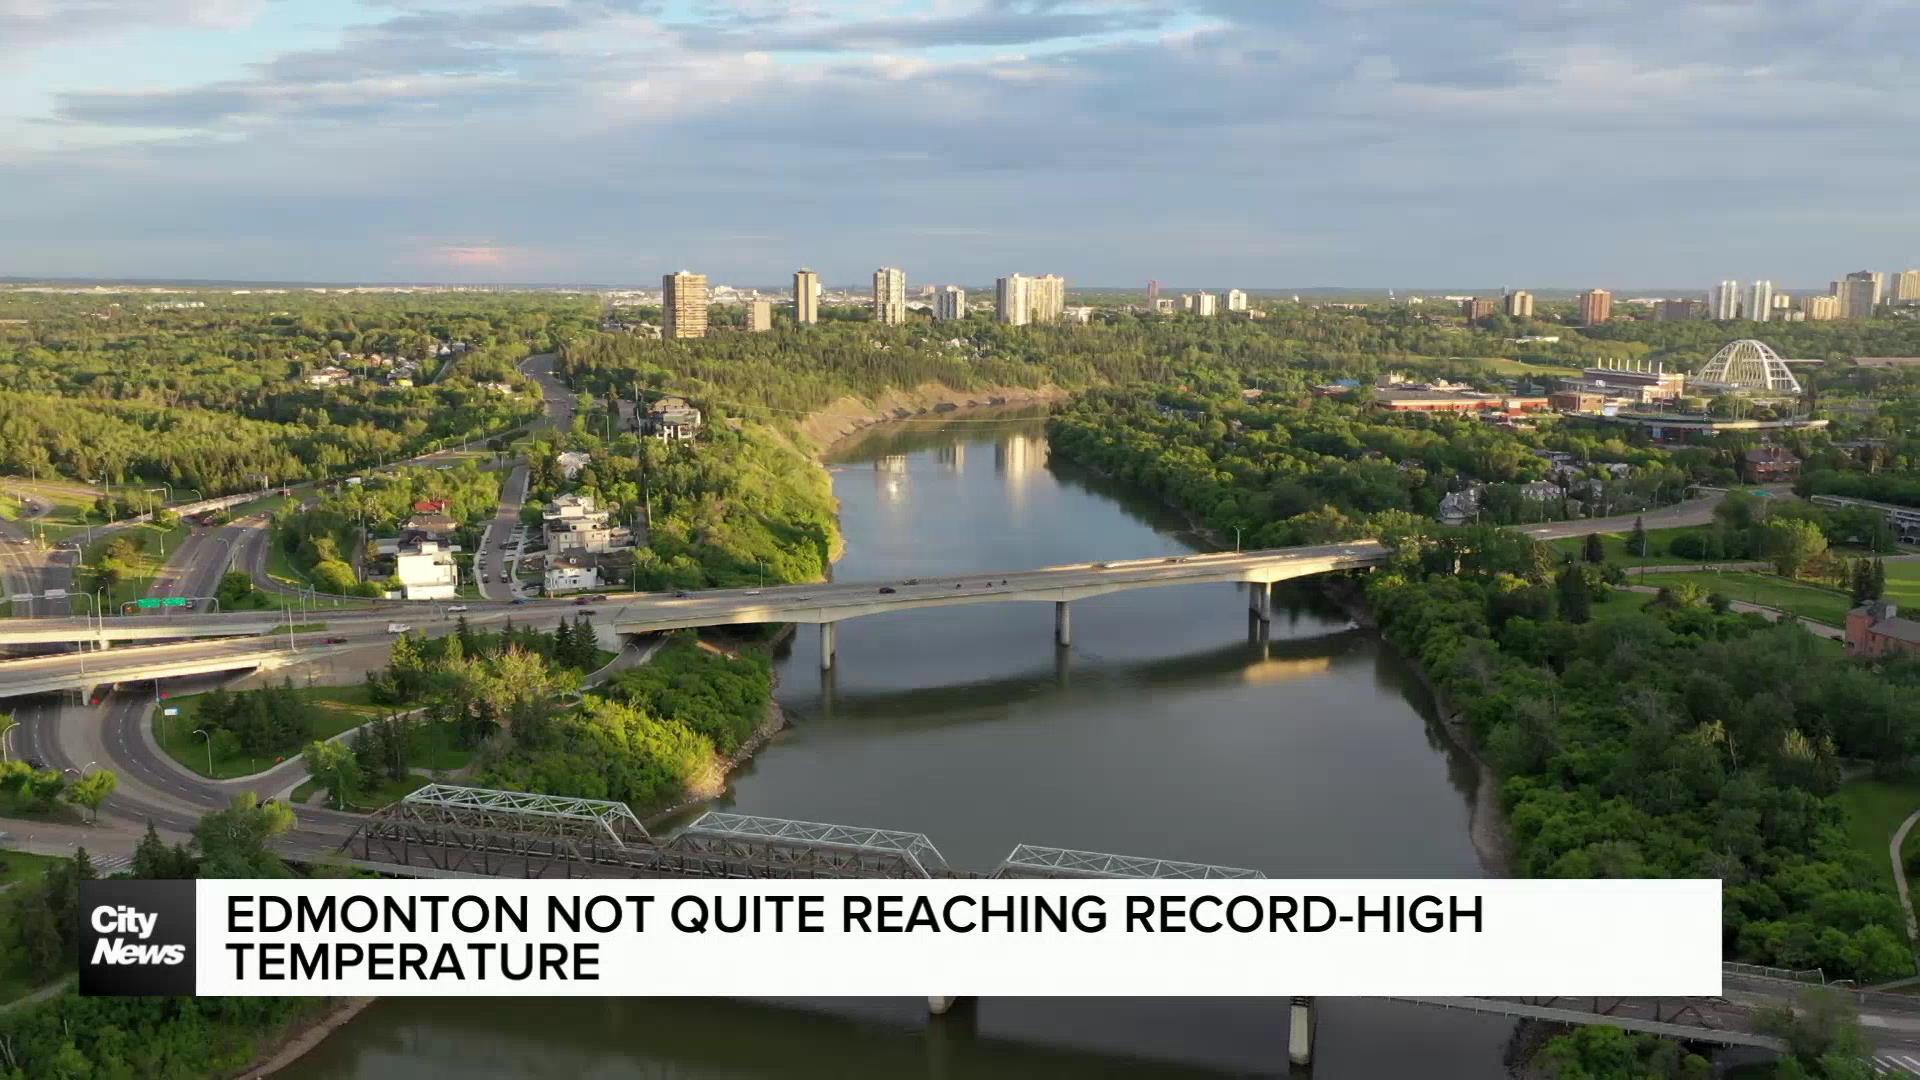 Edmonton’s hottest July 10th on record, not quite reaching all-time record high